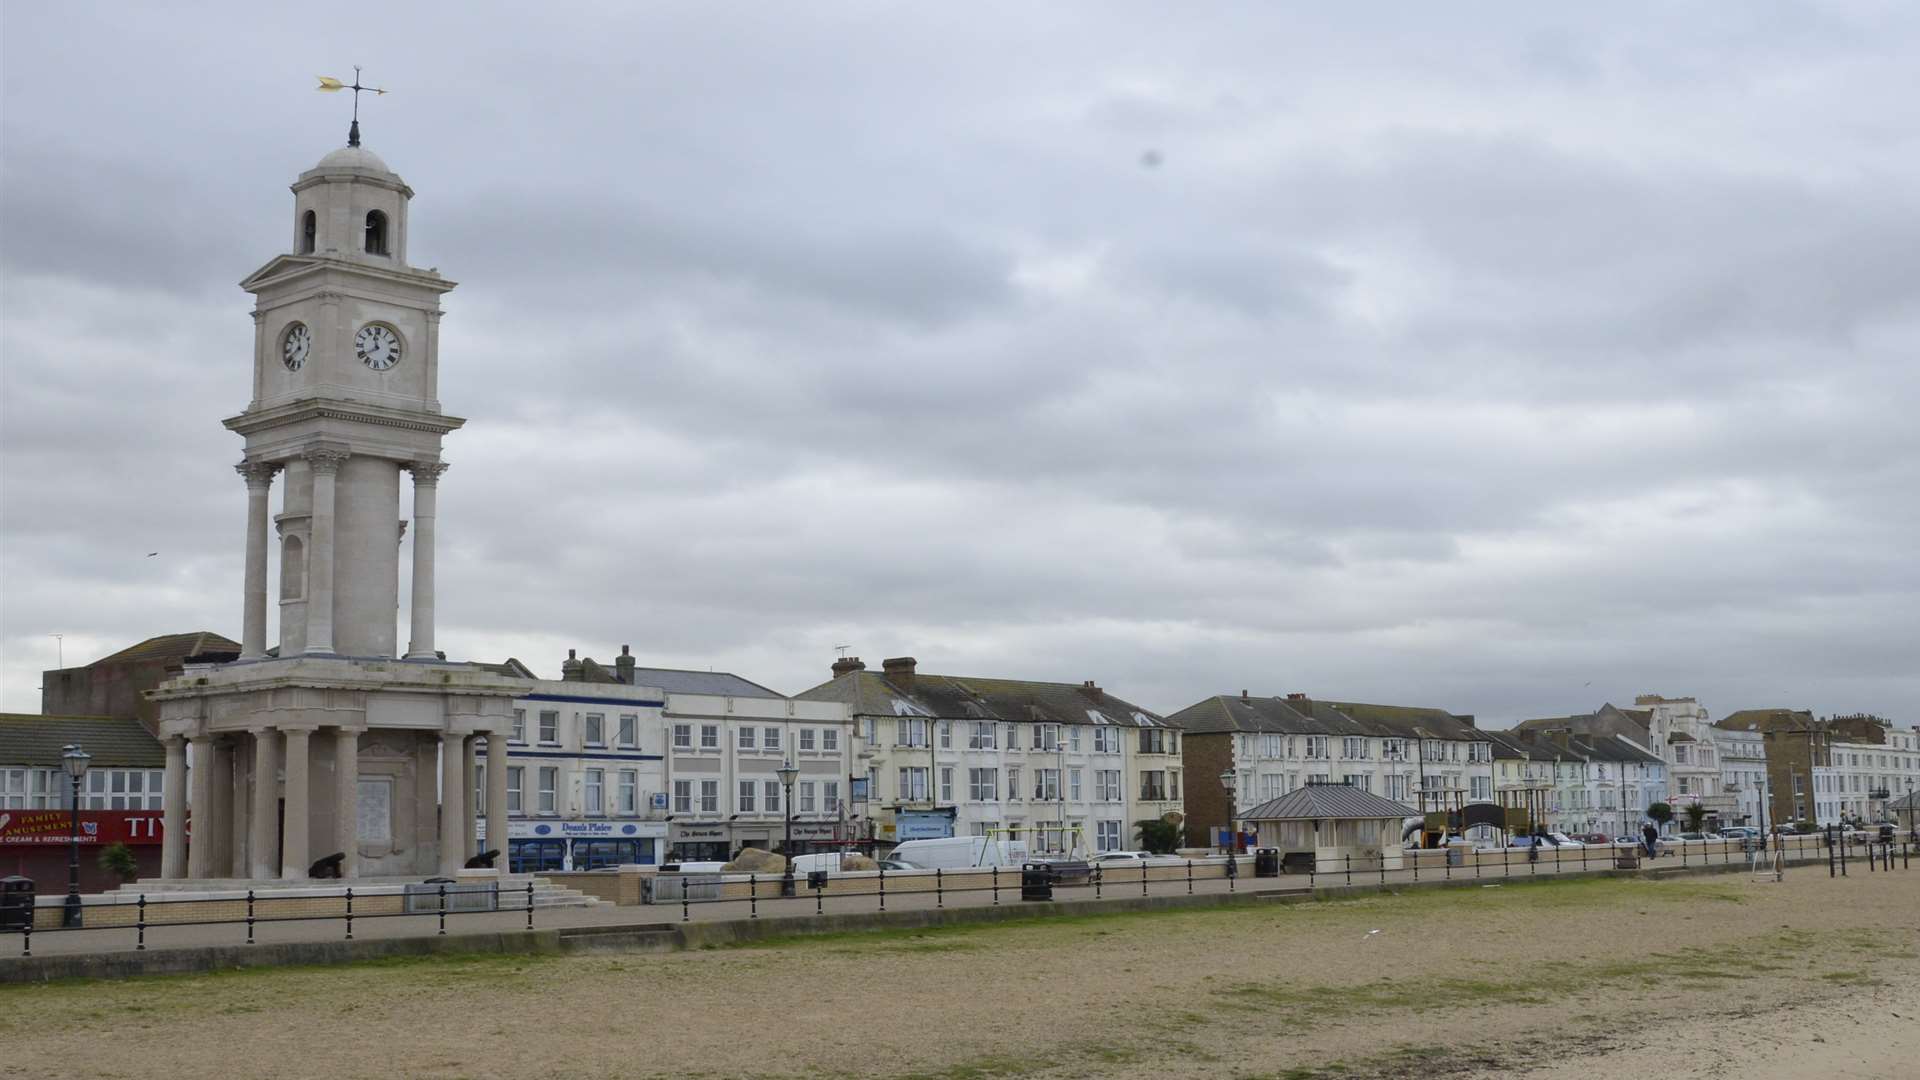 The teenager was attacked outside Herne Bay clock tower